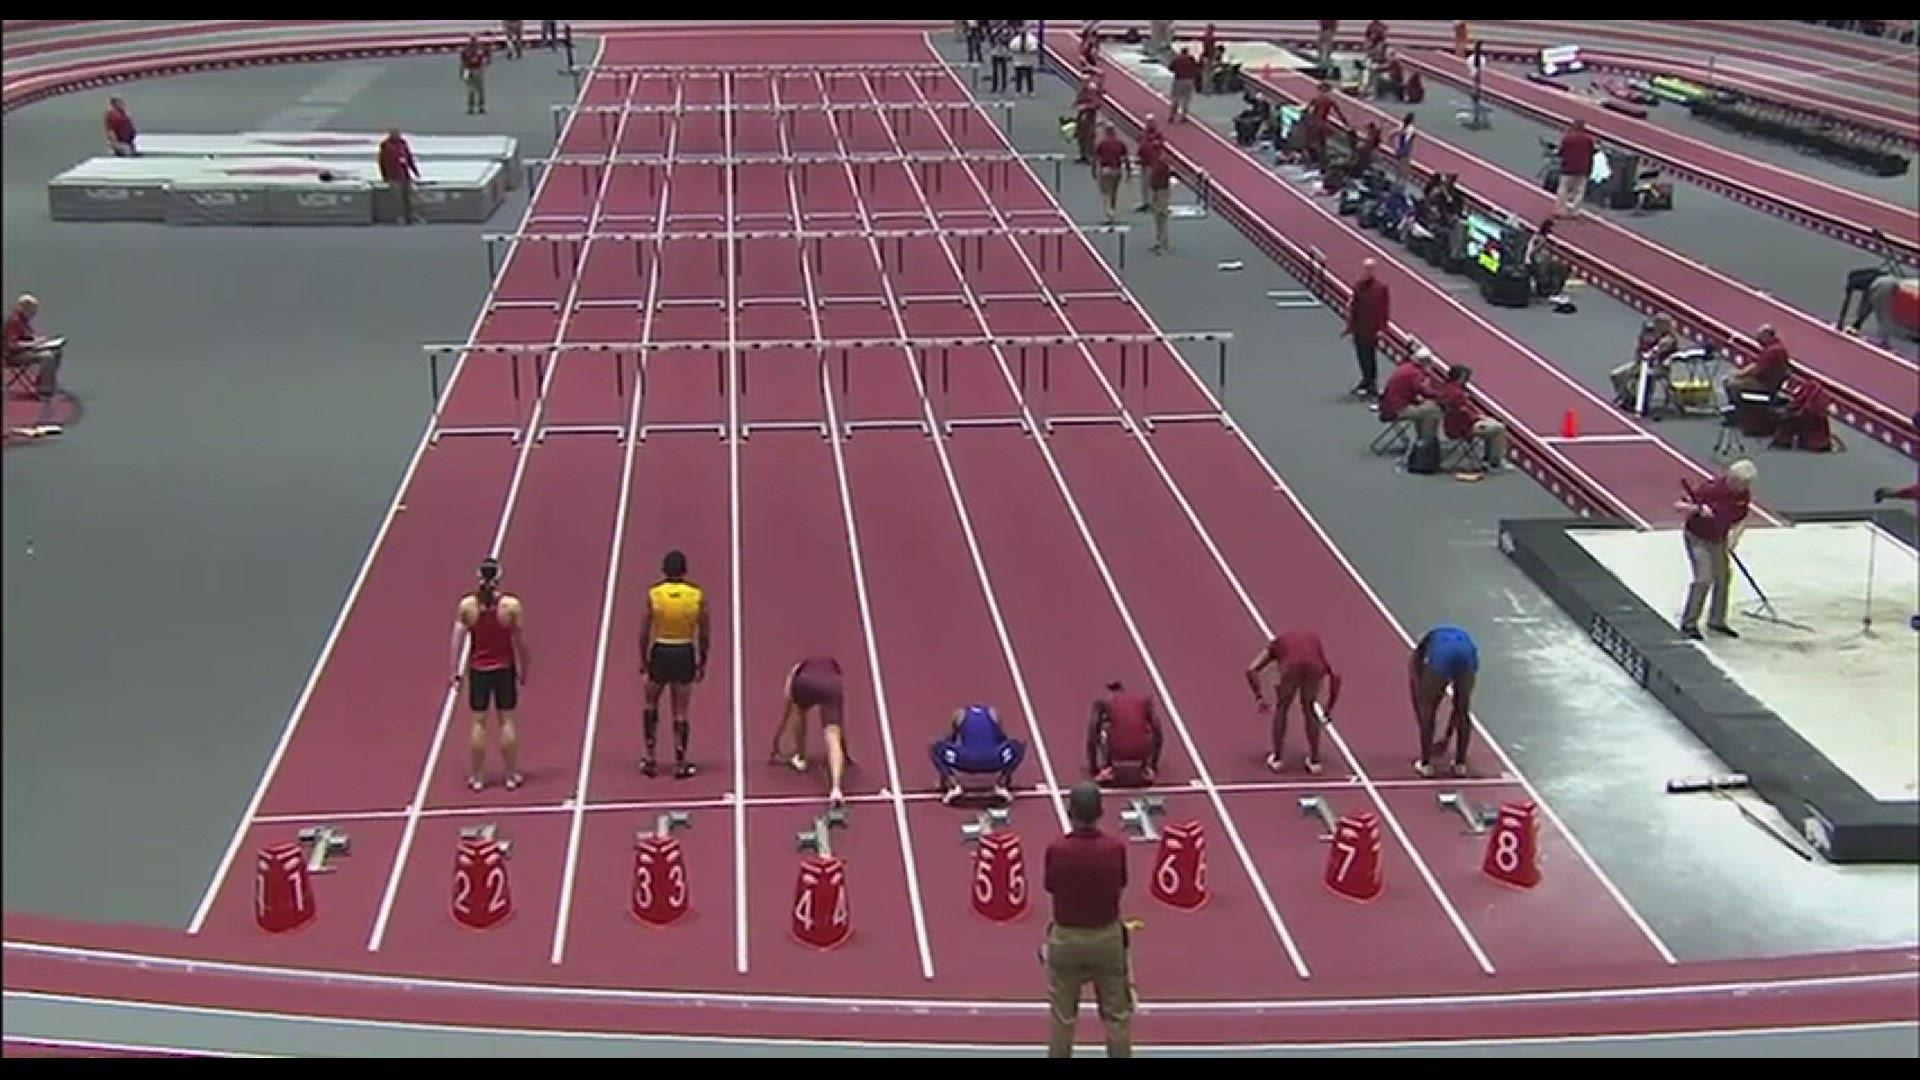 'Video thumbnail for Trey CUNNINGHAM of Florida State wins 60m hurdles at Tyson Invitational'